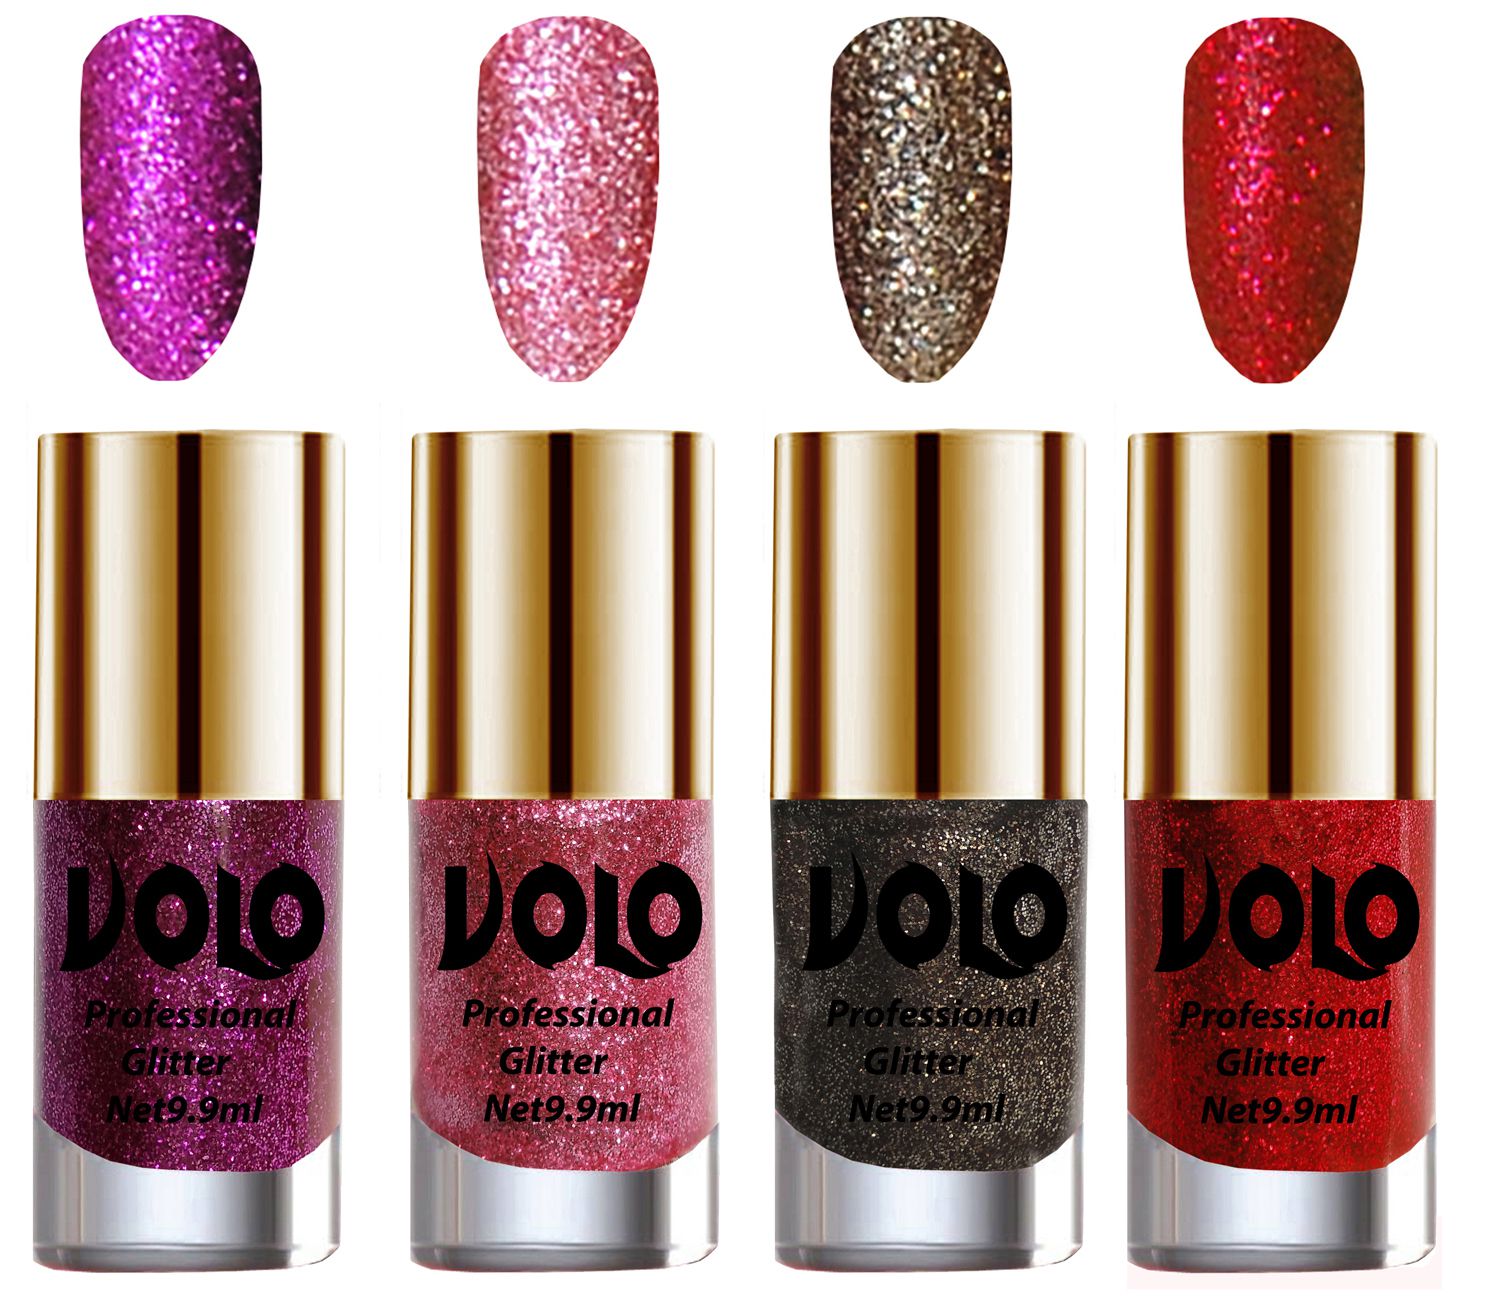     			VOLO Professionally Used Glitter Shine Nail Polish Purple,Pink,Grey Red Pack of 4 39 mL